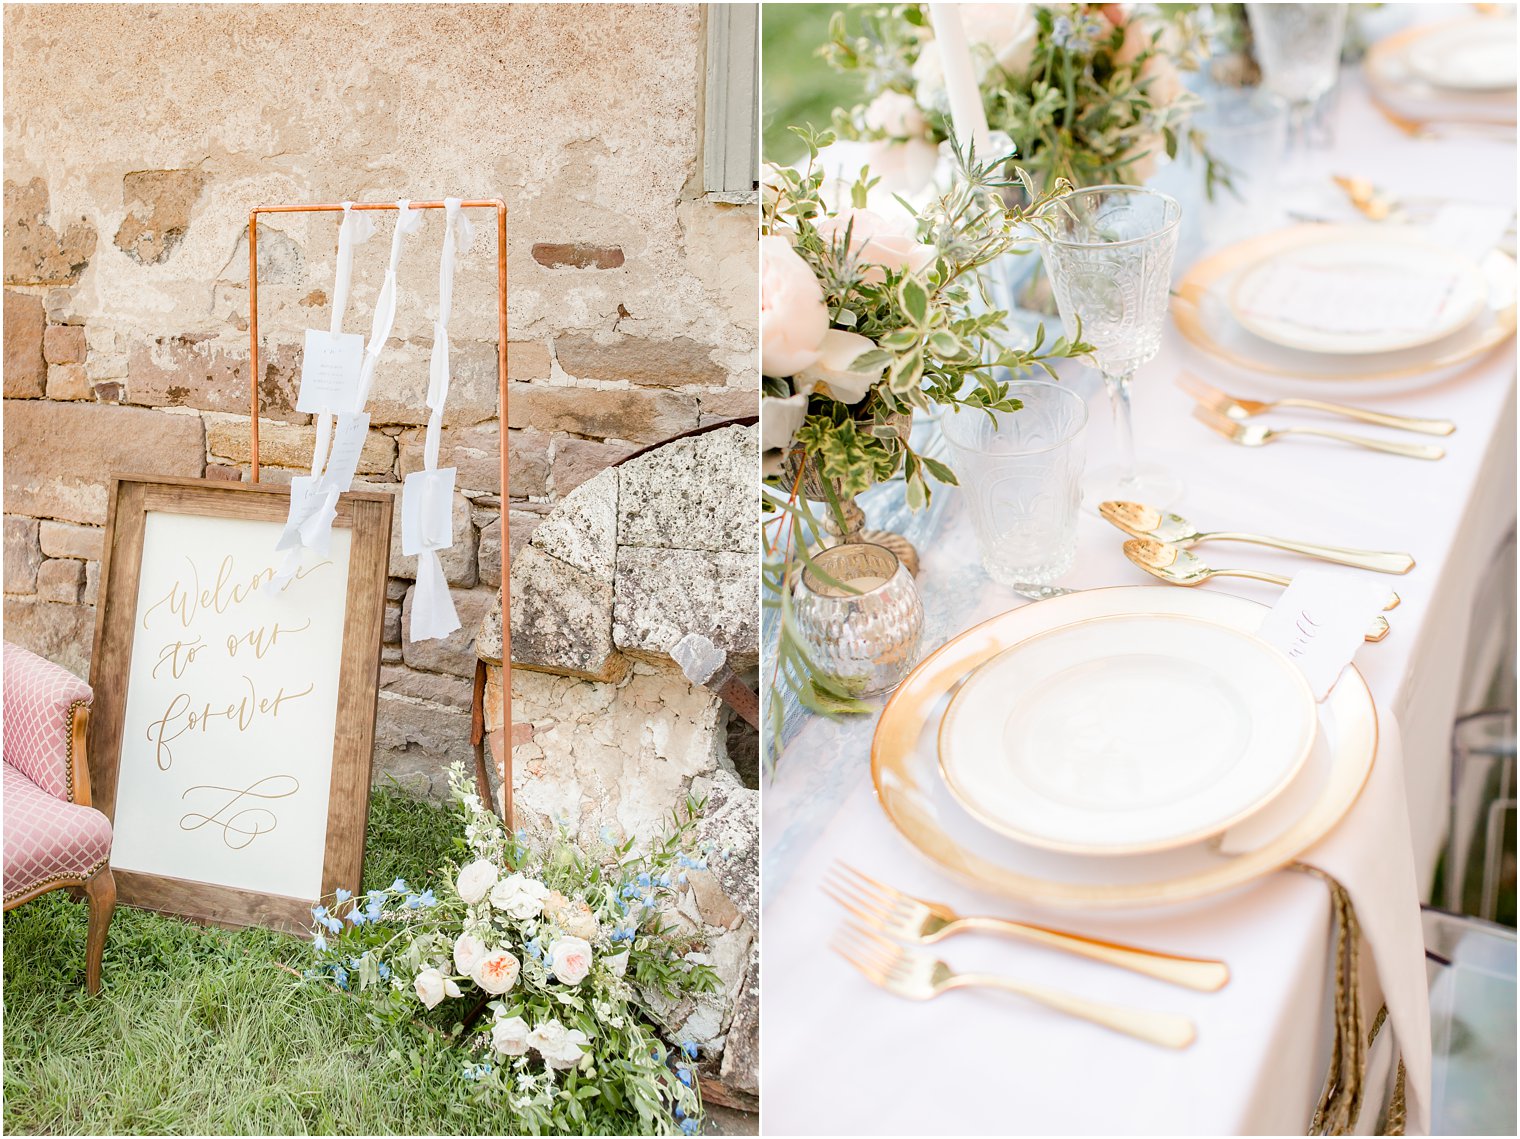 rustic rose gold rentals by B & B Party Rentals and Stylwed photographed by Idalia Photography